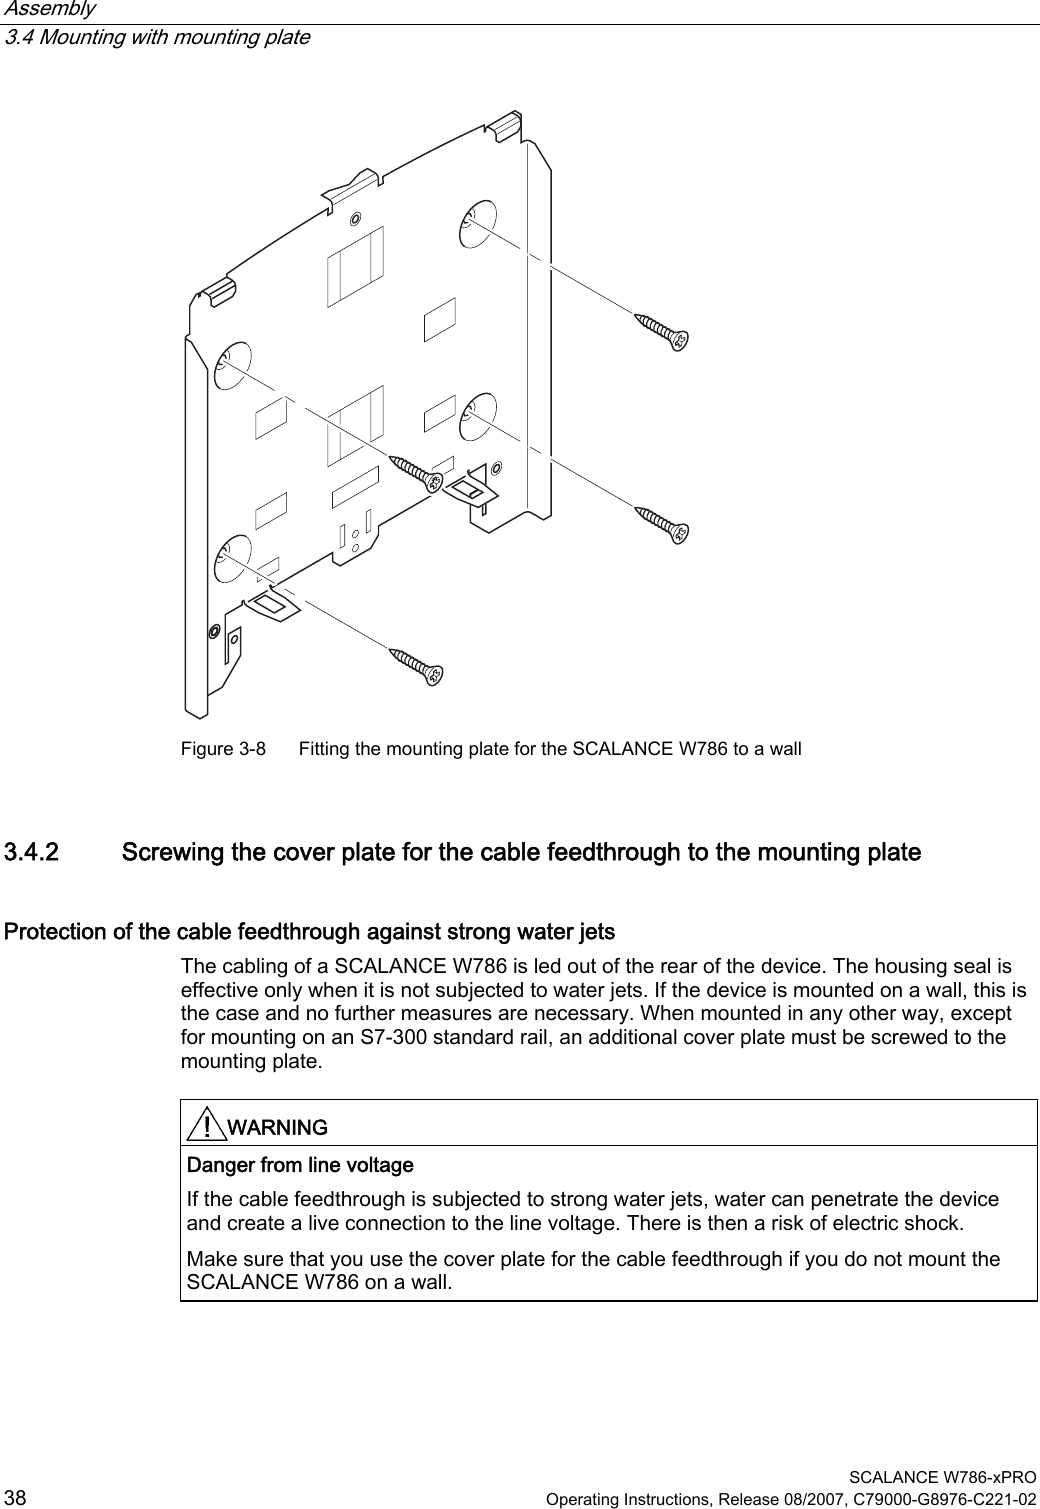 Assembly   3.4 Mounting with mounting plate  SCALANCE W786-xPRO 38  Operating Instructions, Release 08/2007, C79000-G8976-C221-02  Figure 3-8  Fitting the mounting plate for the SCALANCE W786 to a wall 3.4.2 Screwing the cover plate for the cable feedthrough to the mounting plate Protection of the cable feedthrough against strong water jets The cabling of a SCALANCE W786 is led out of the rear of the device. The housing seal is effective only when it is not subjected to water jets. If the device is mounted on a wall, this is the case and no further measures are necessary. When mounted in any other way, except for mounting on an S7-300 standard rail, an additional cover plate must be screwed to the mounting plate.  WARNING  Danger from line voltage If the cable feedthrough is subjected to strong water jets, water can penetrate the device and create a live connection to the line voltage. There is then a risk of electric shock. Make sure that you use the cover plate for the cable feedthrough if you do not mount the SCALANCE W786 on a wall.  